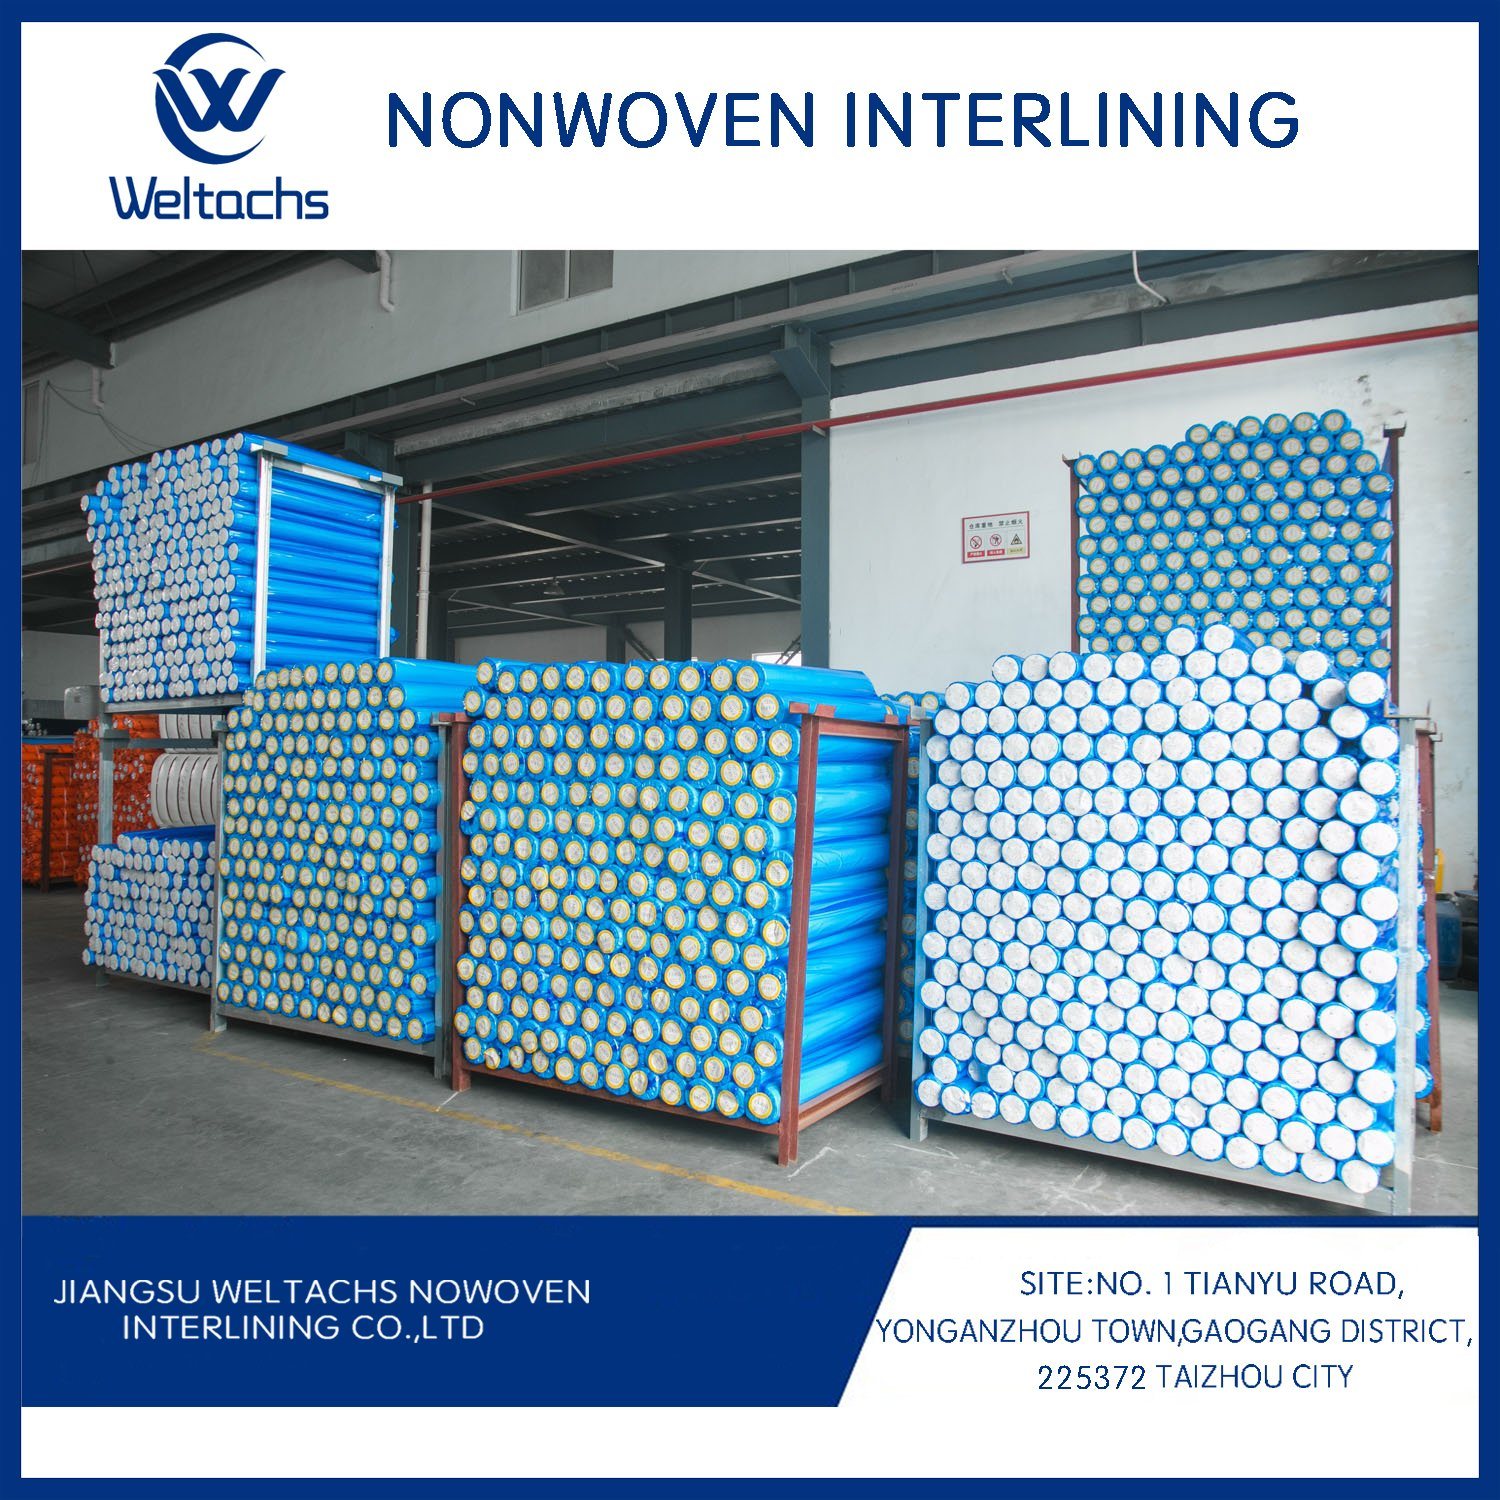 100% Polyester Nonwoven Interlining for Garments Interlining DOT Fuse